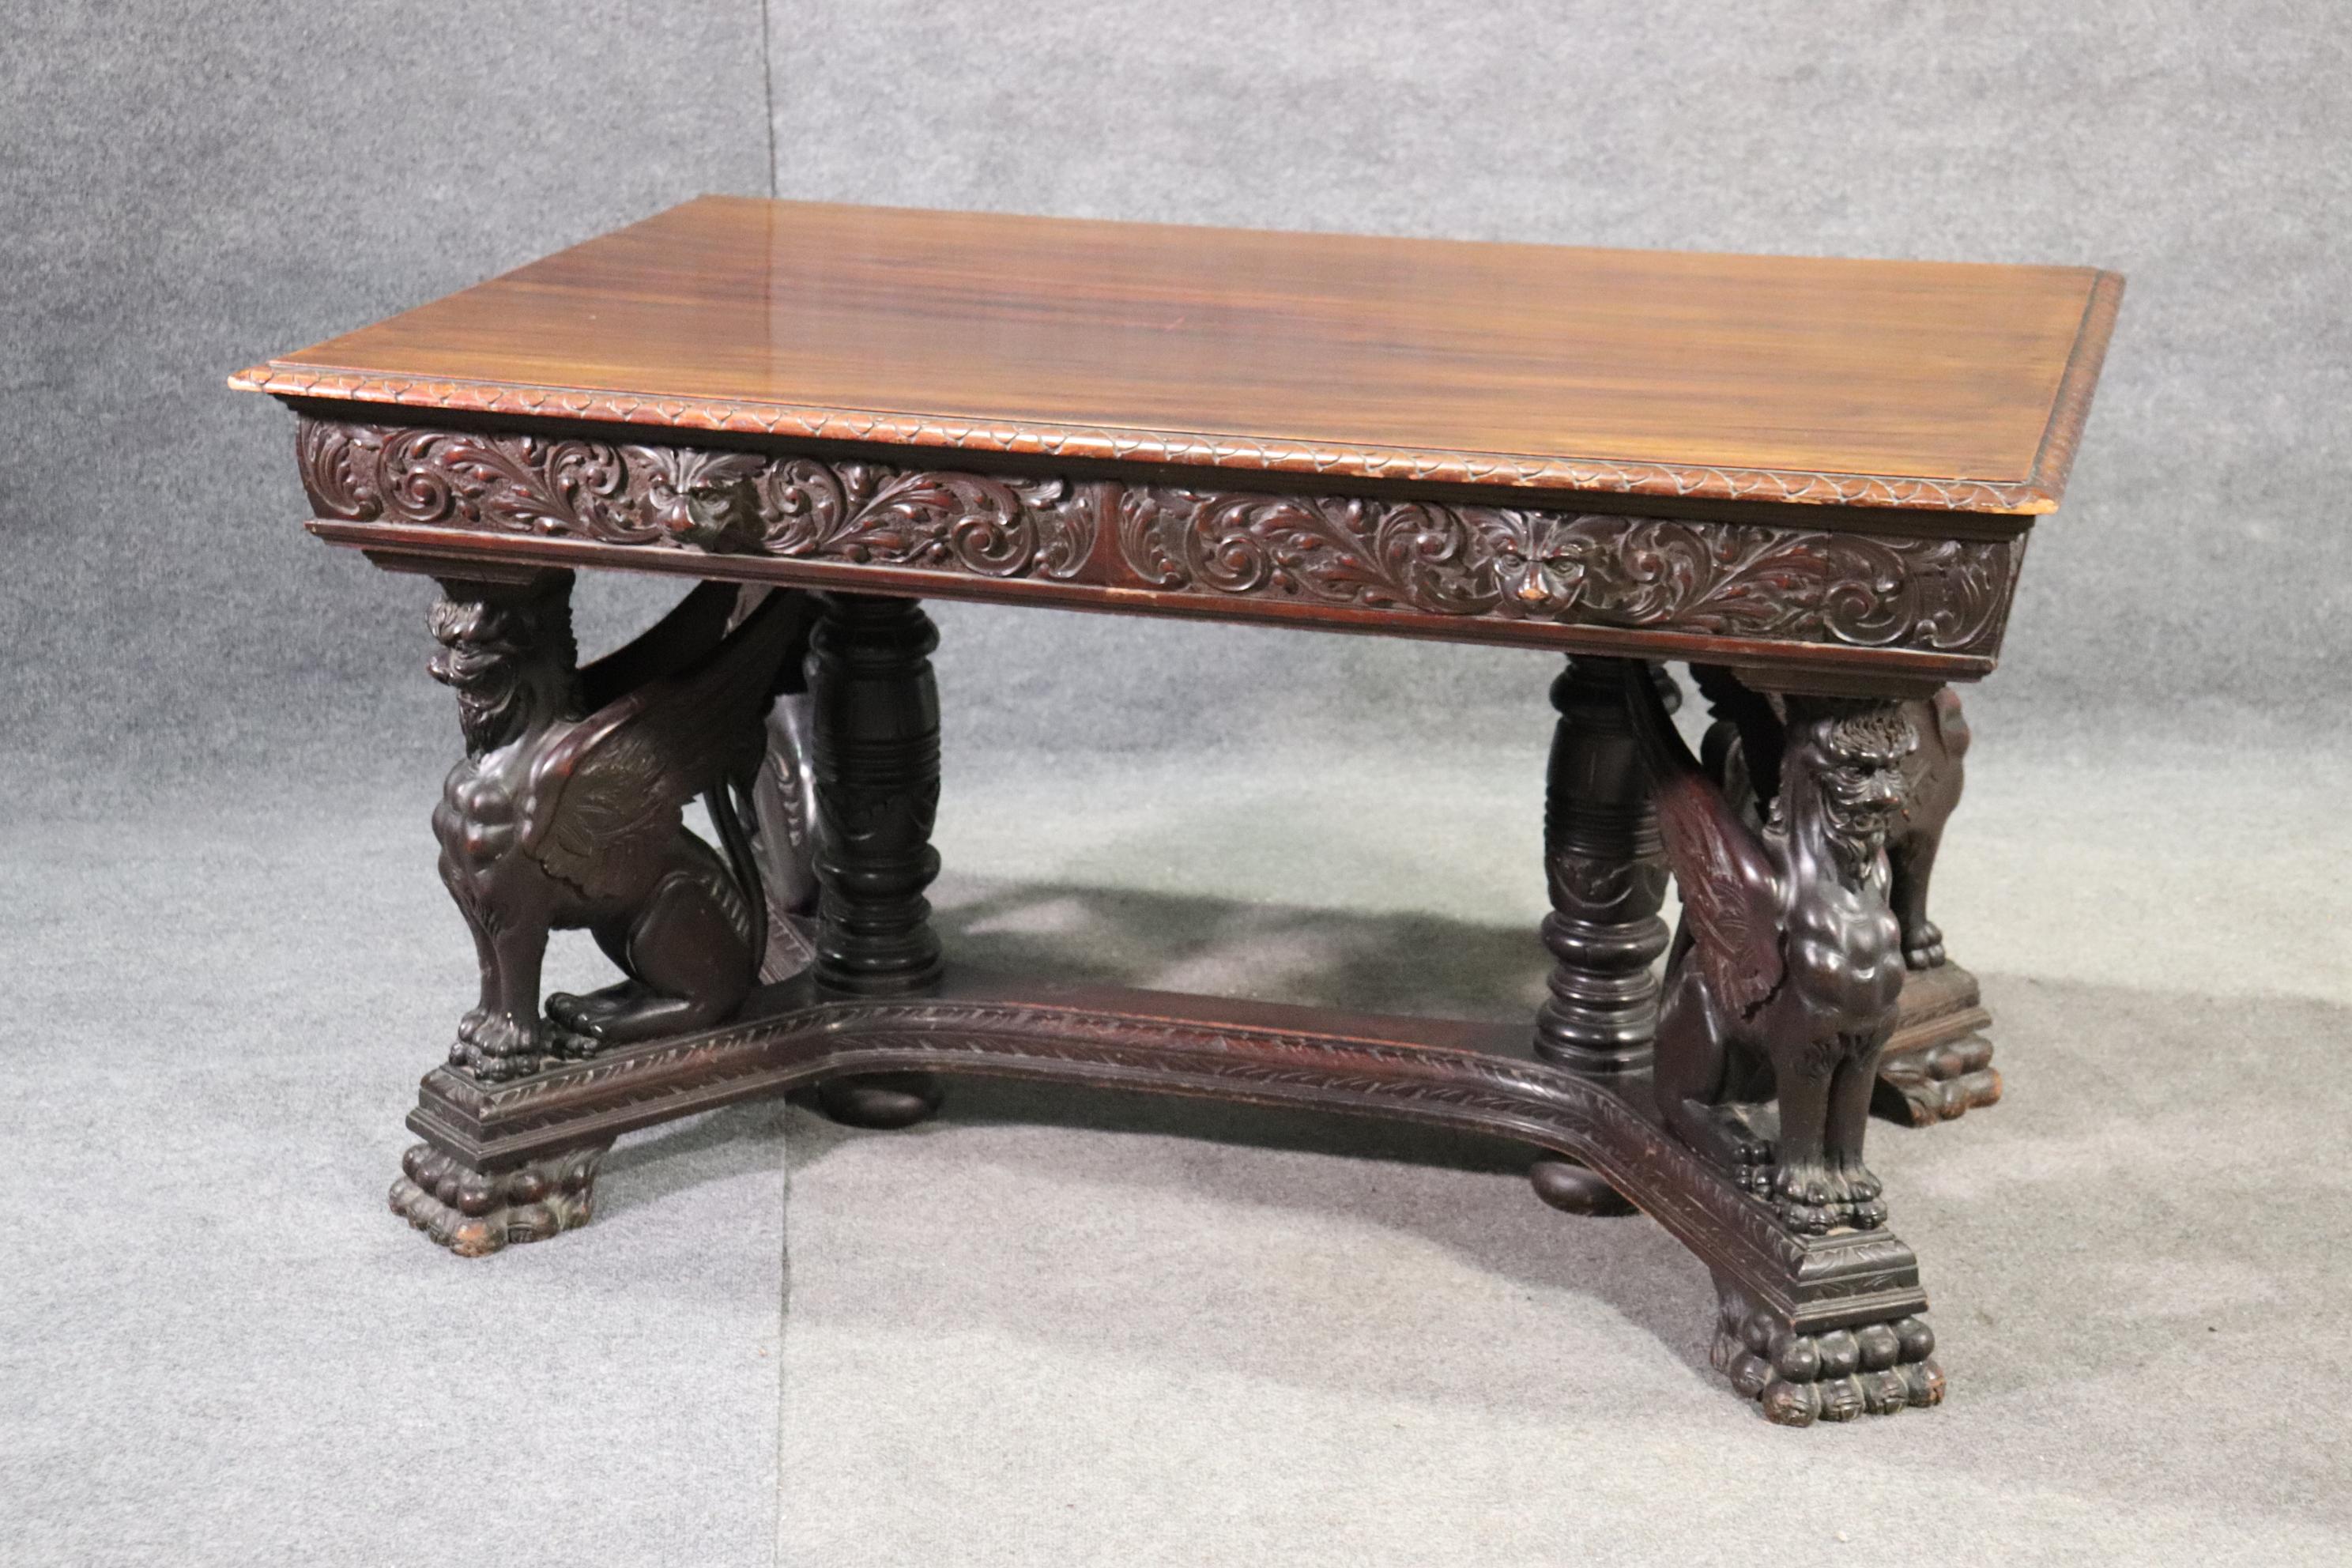 This is one of RJ Horner's most iconic designs. The winged griffin desk with it's incredibly carved griffins guarding the corners of the desk and the unique faux drawer on each side and one working drawer configuration was a unique feature Horner